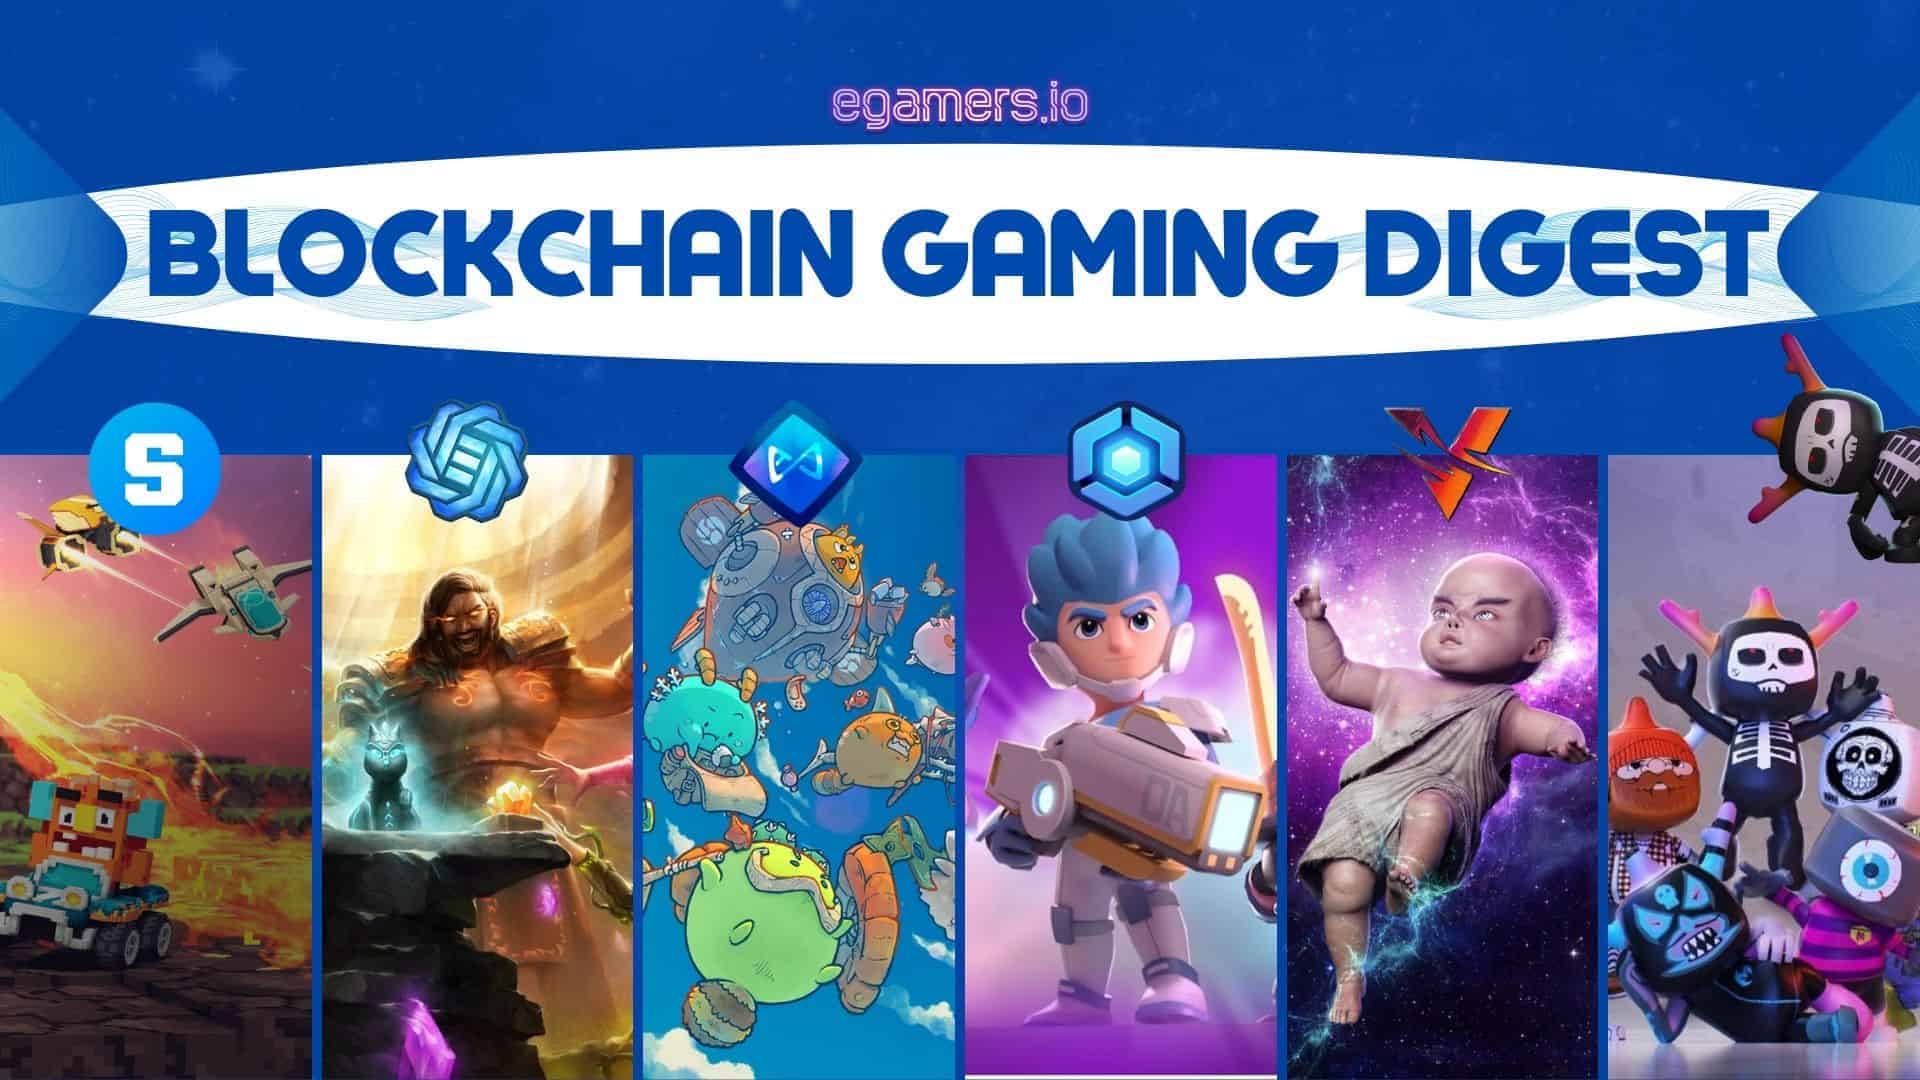 BLOCKCHAIN GAMING DIGEST new The upcoming Crypto MMO dancing game Blankos Block Party has revealed a new exciting trailer showcasing some dance moves, graphics and gameplay footage.